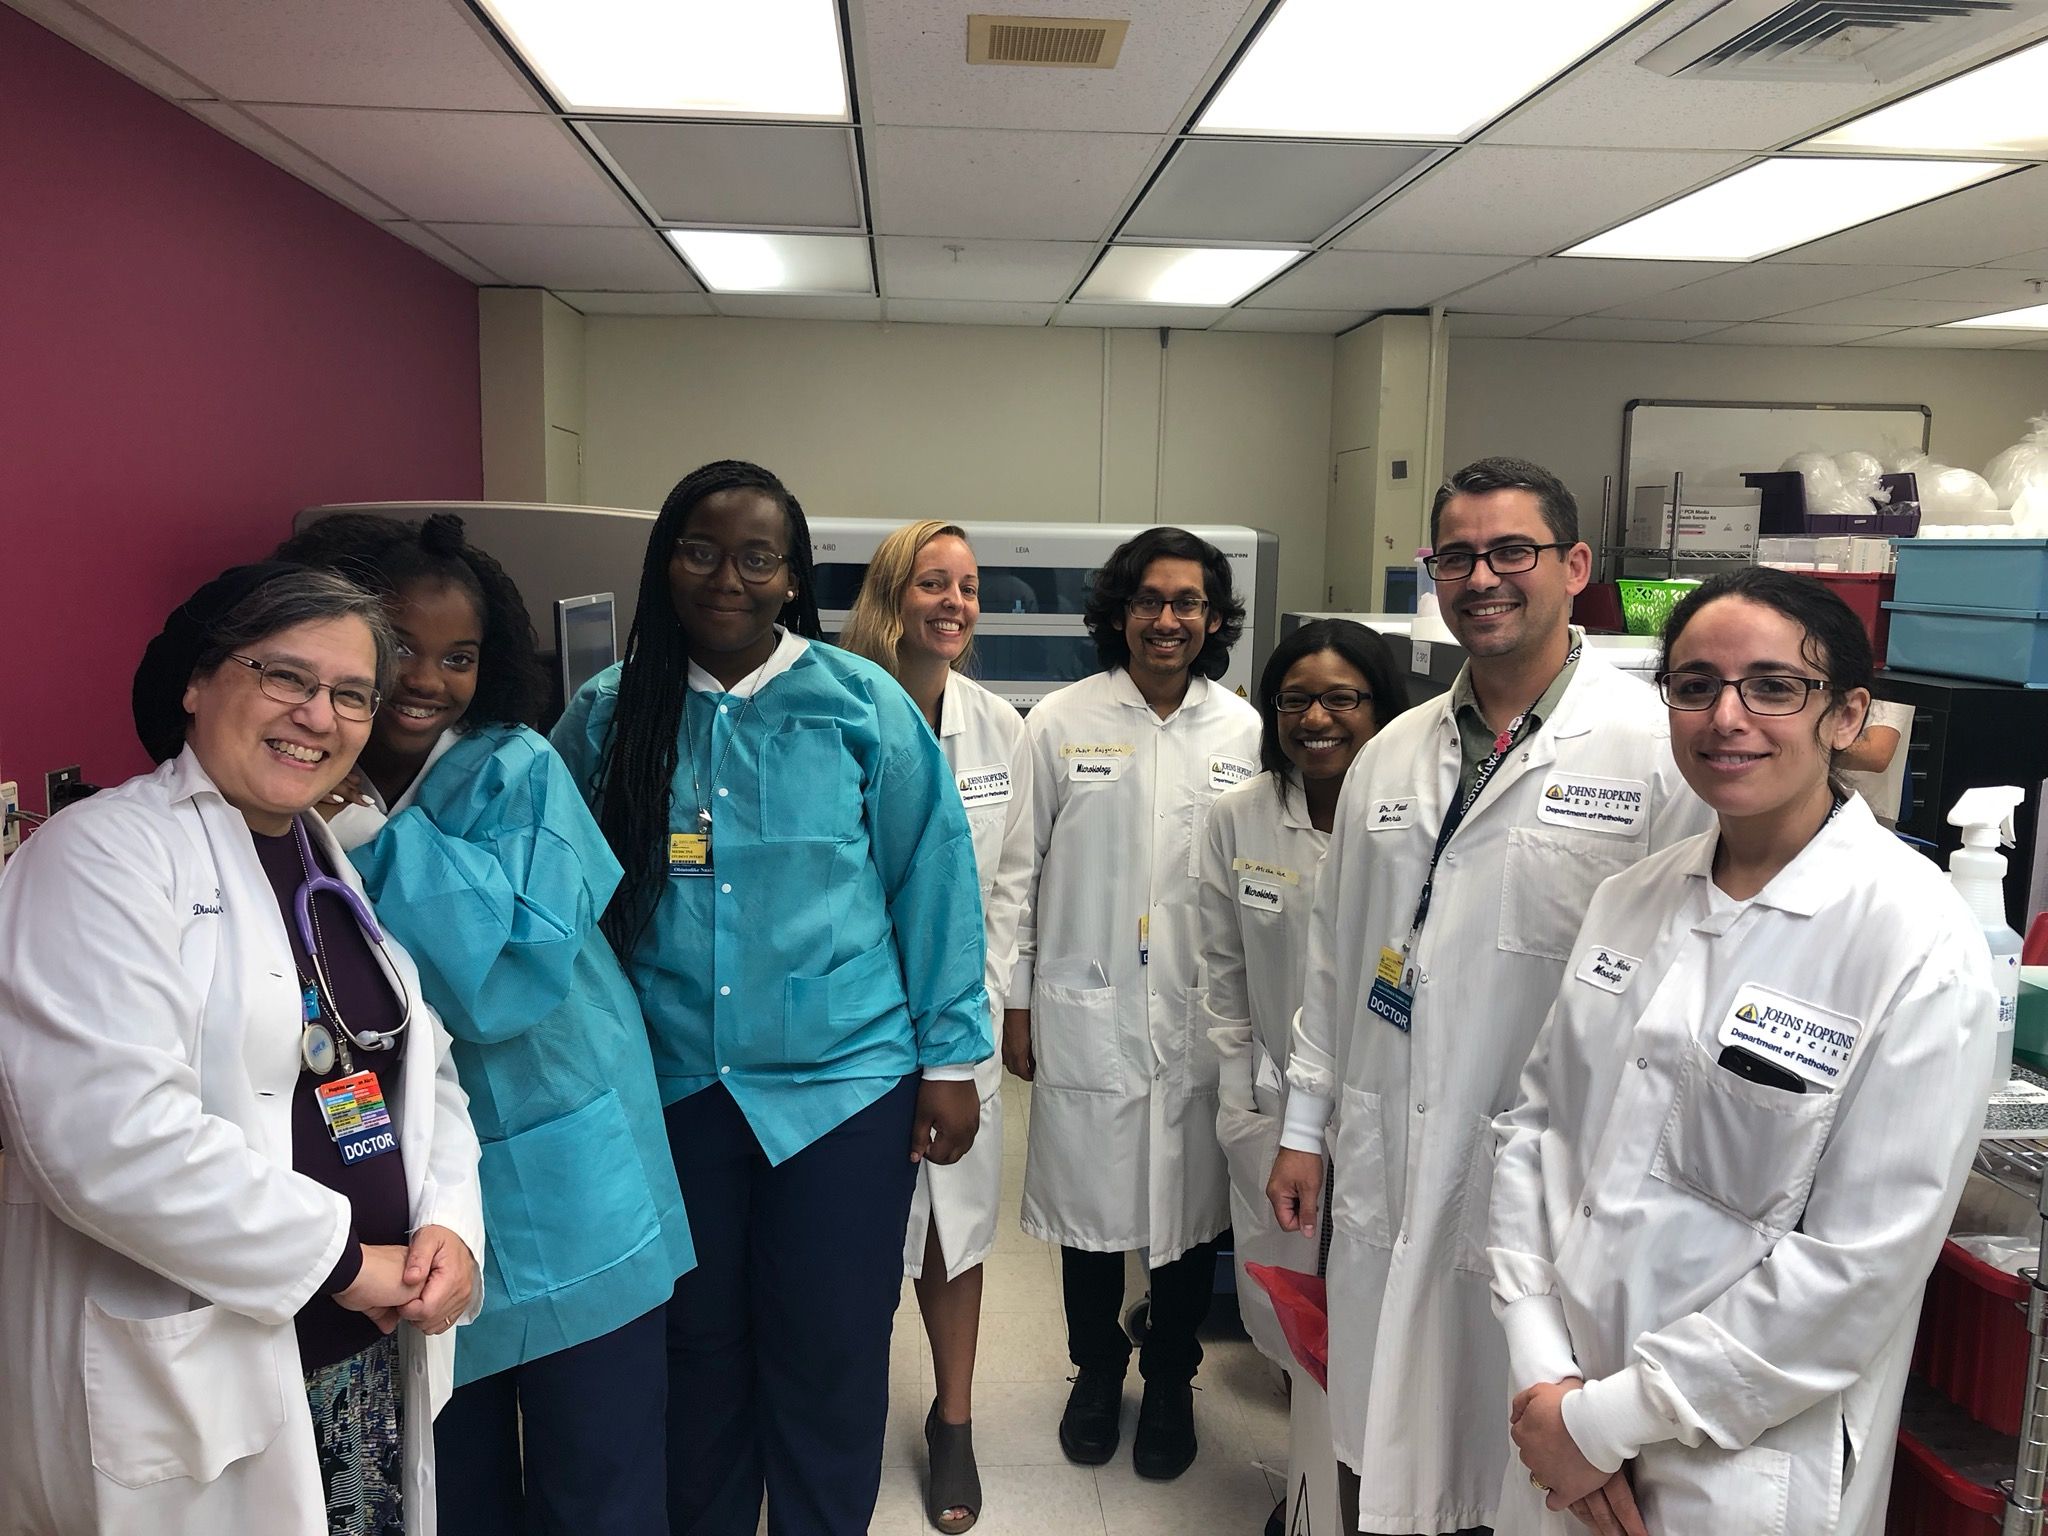 Johns Hopkins doctors mentor students from underrepresented backgrounds to become health professionals and community leaders. The students go on to advance health equity both inside and outside Baltimore’s hospitals and clinics. 